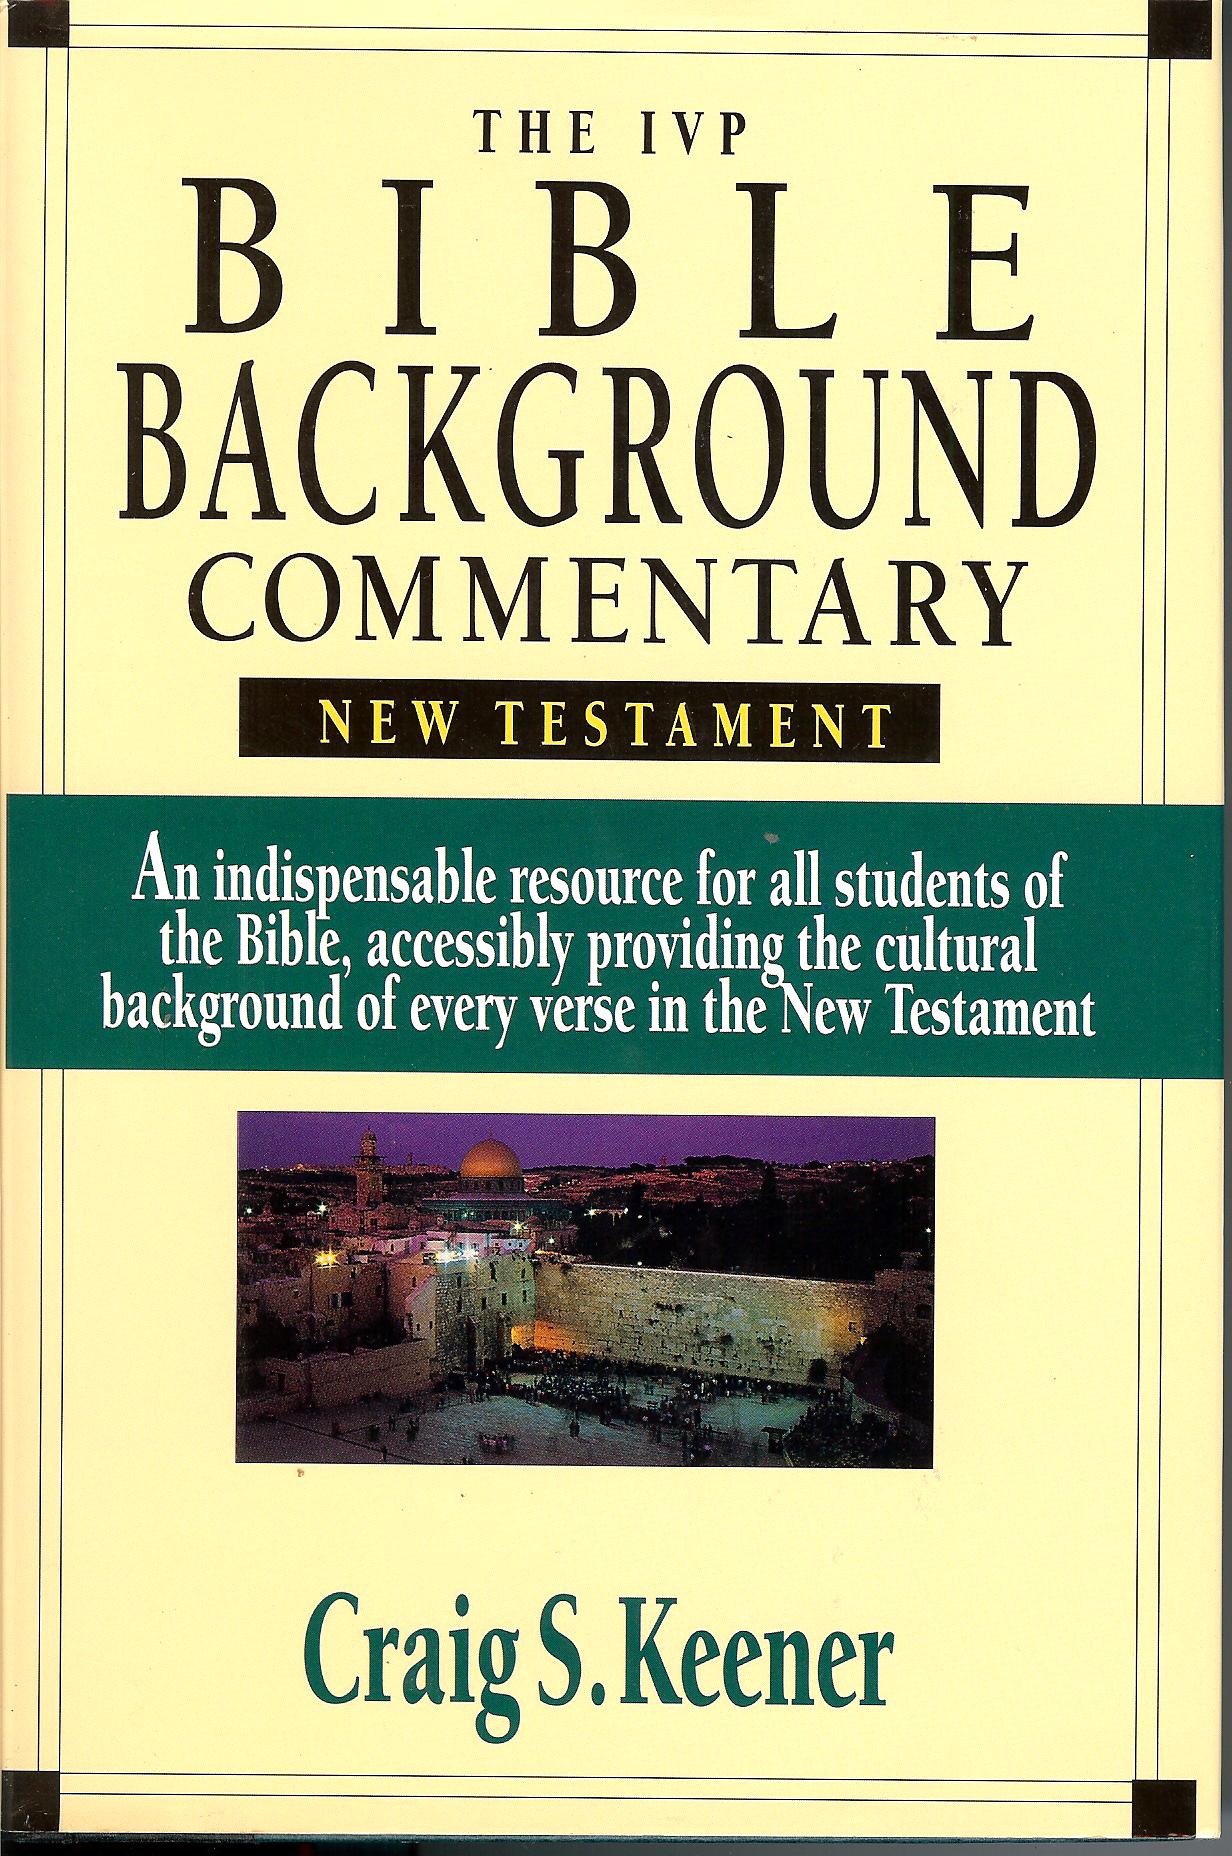 Ivp Bible Background Mentary New Testament Theword Books